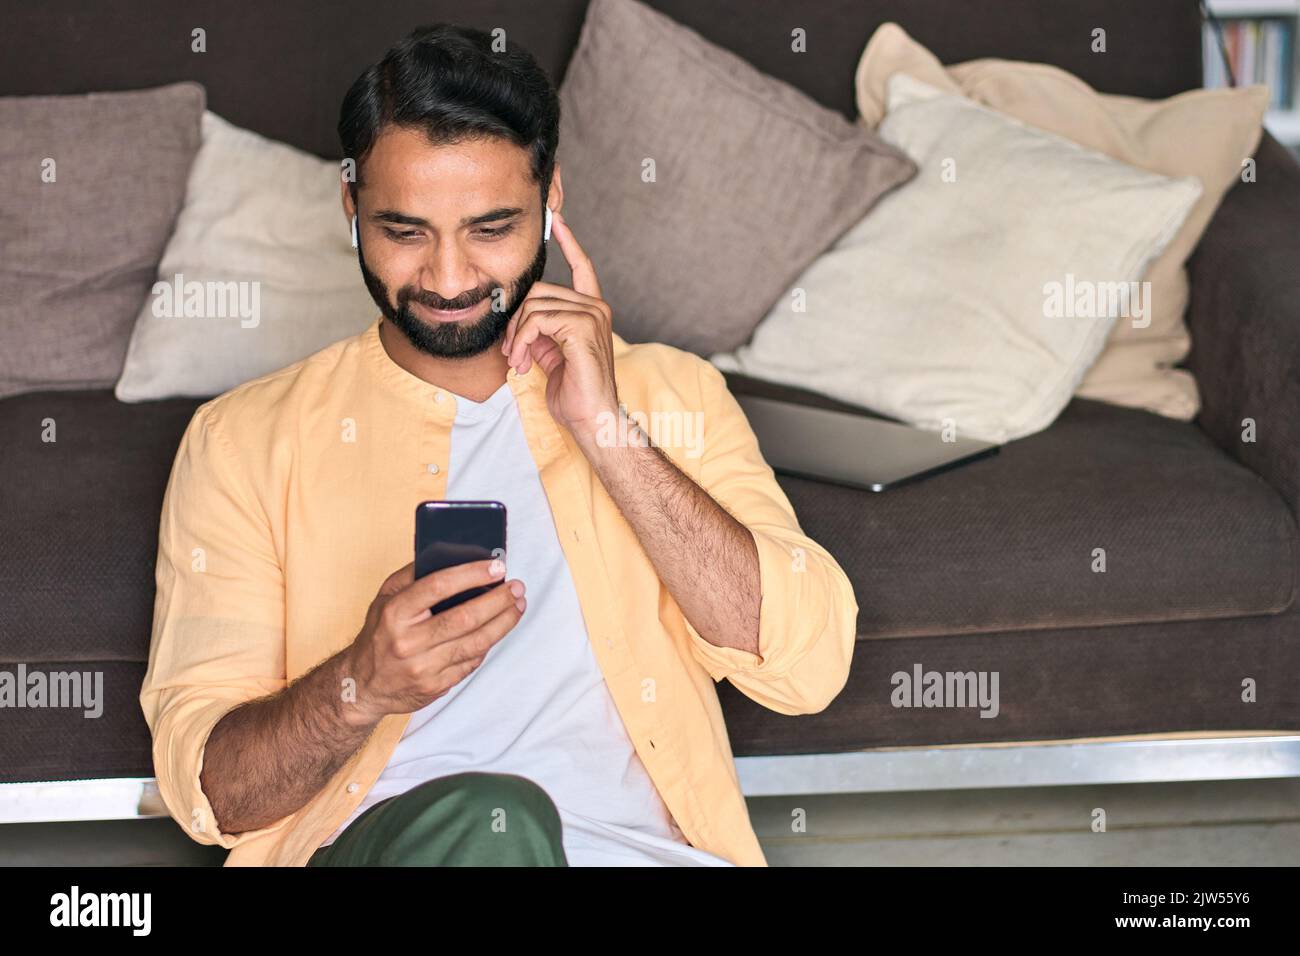 Indian man sitting at home on sofa using mobile phone watching videos. Stock Photo